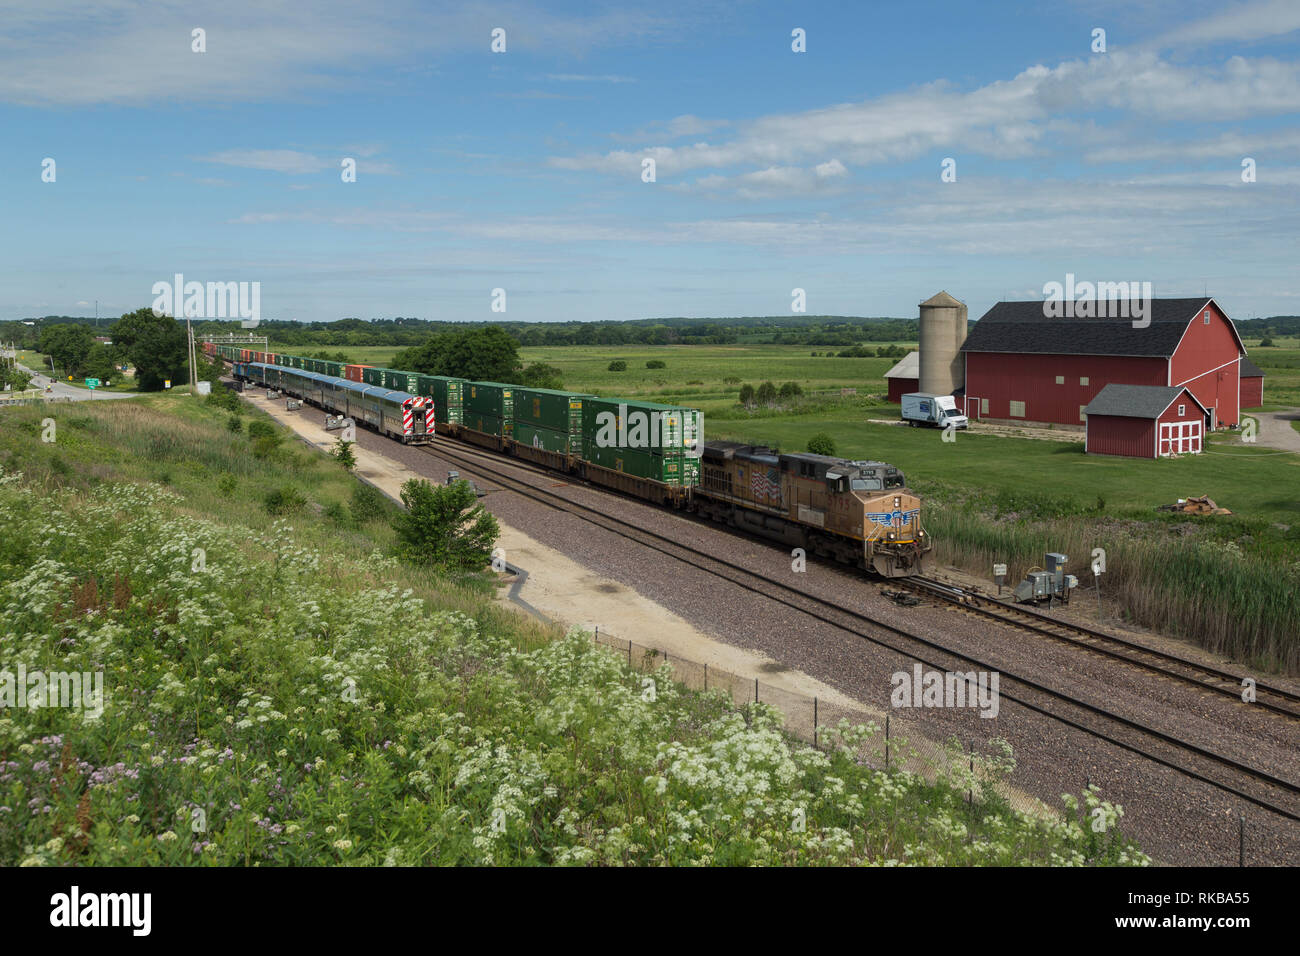 A Union Pacific container train meets a Metra commuter train outside of Elburn, Illinois. Stock Photo